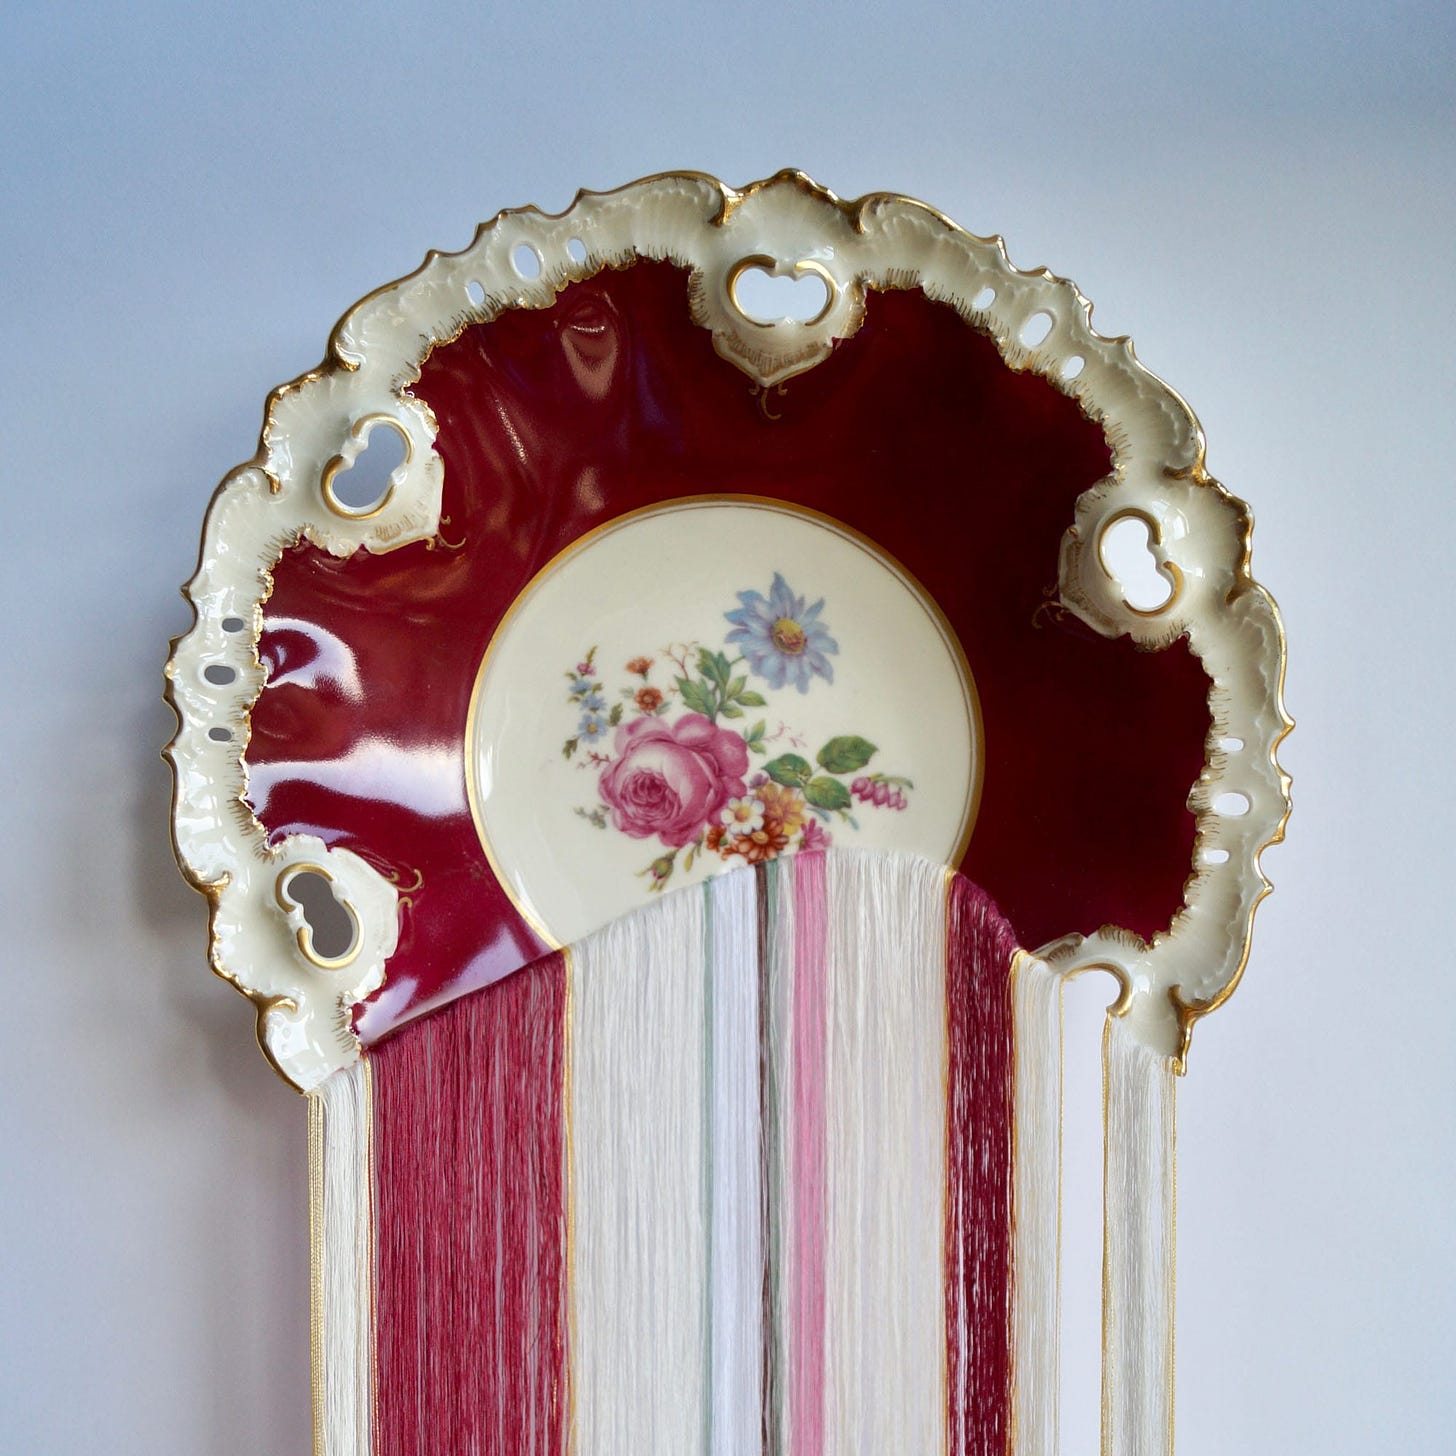 Hundreds of filigree threads hang from a broken porcelain plate in hues of reds, whites, and pinks.